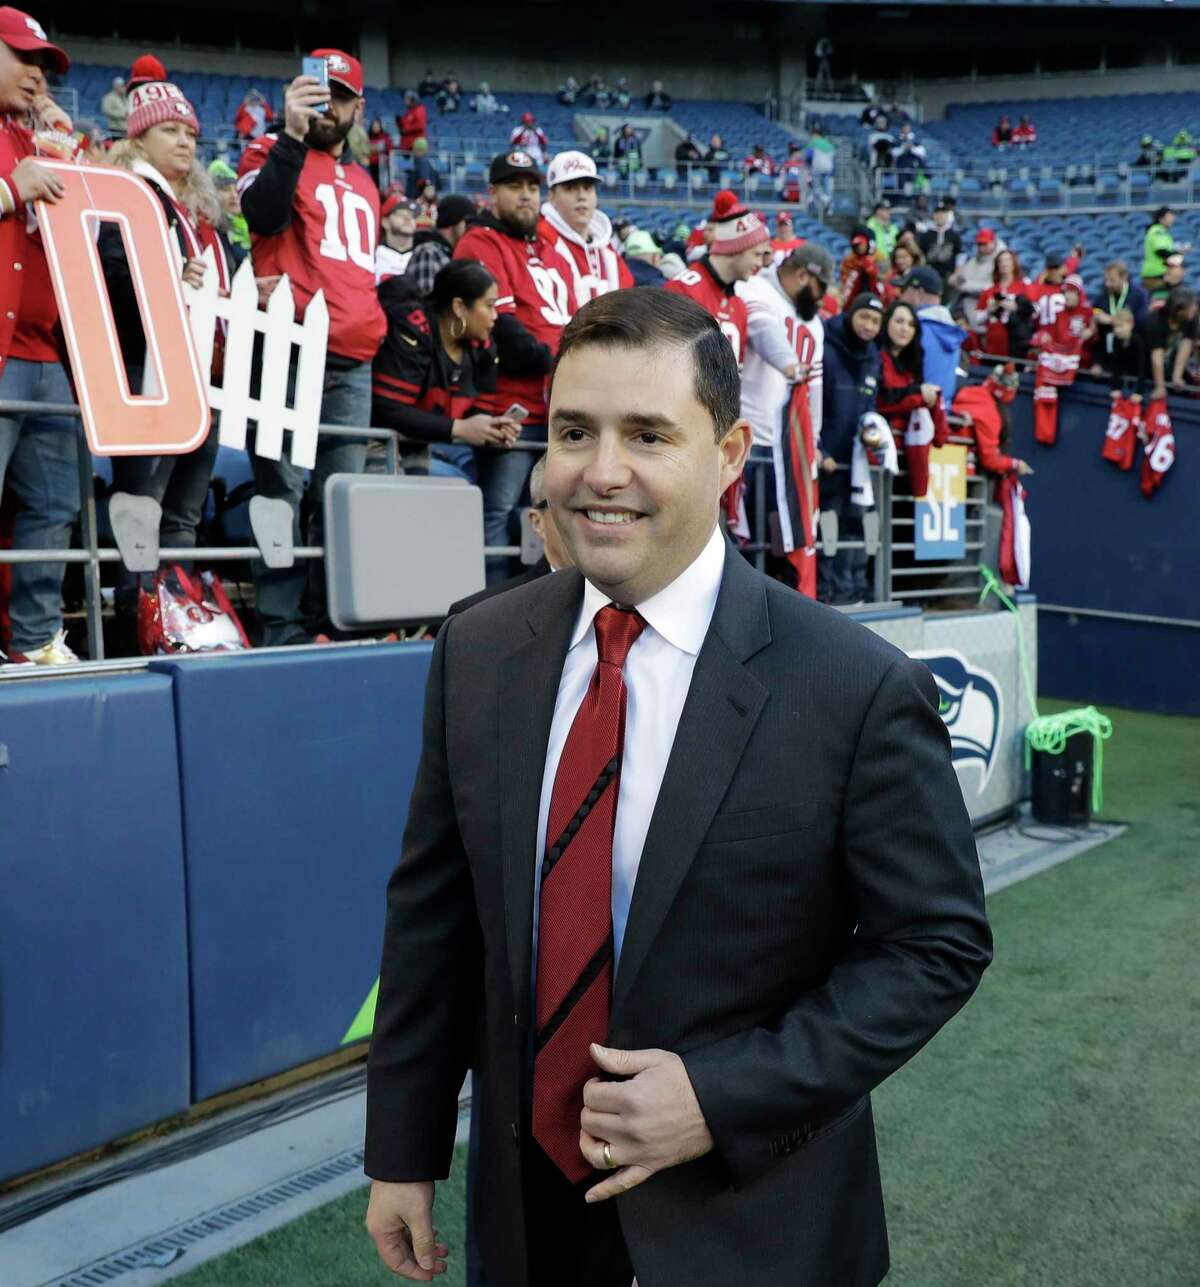 San Francisco 49ers team owner Jed York walks on the field before an NFL football game against the Seattle Seahawks, Sunday, Dec. 29, 2019, in Seattle. (AP Photo/Ted S. Warren)